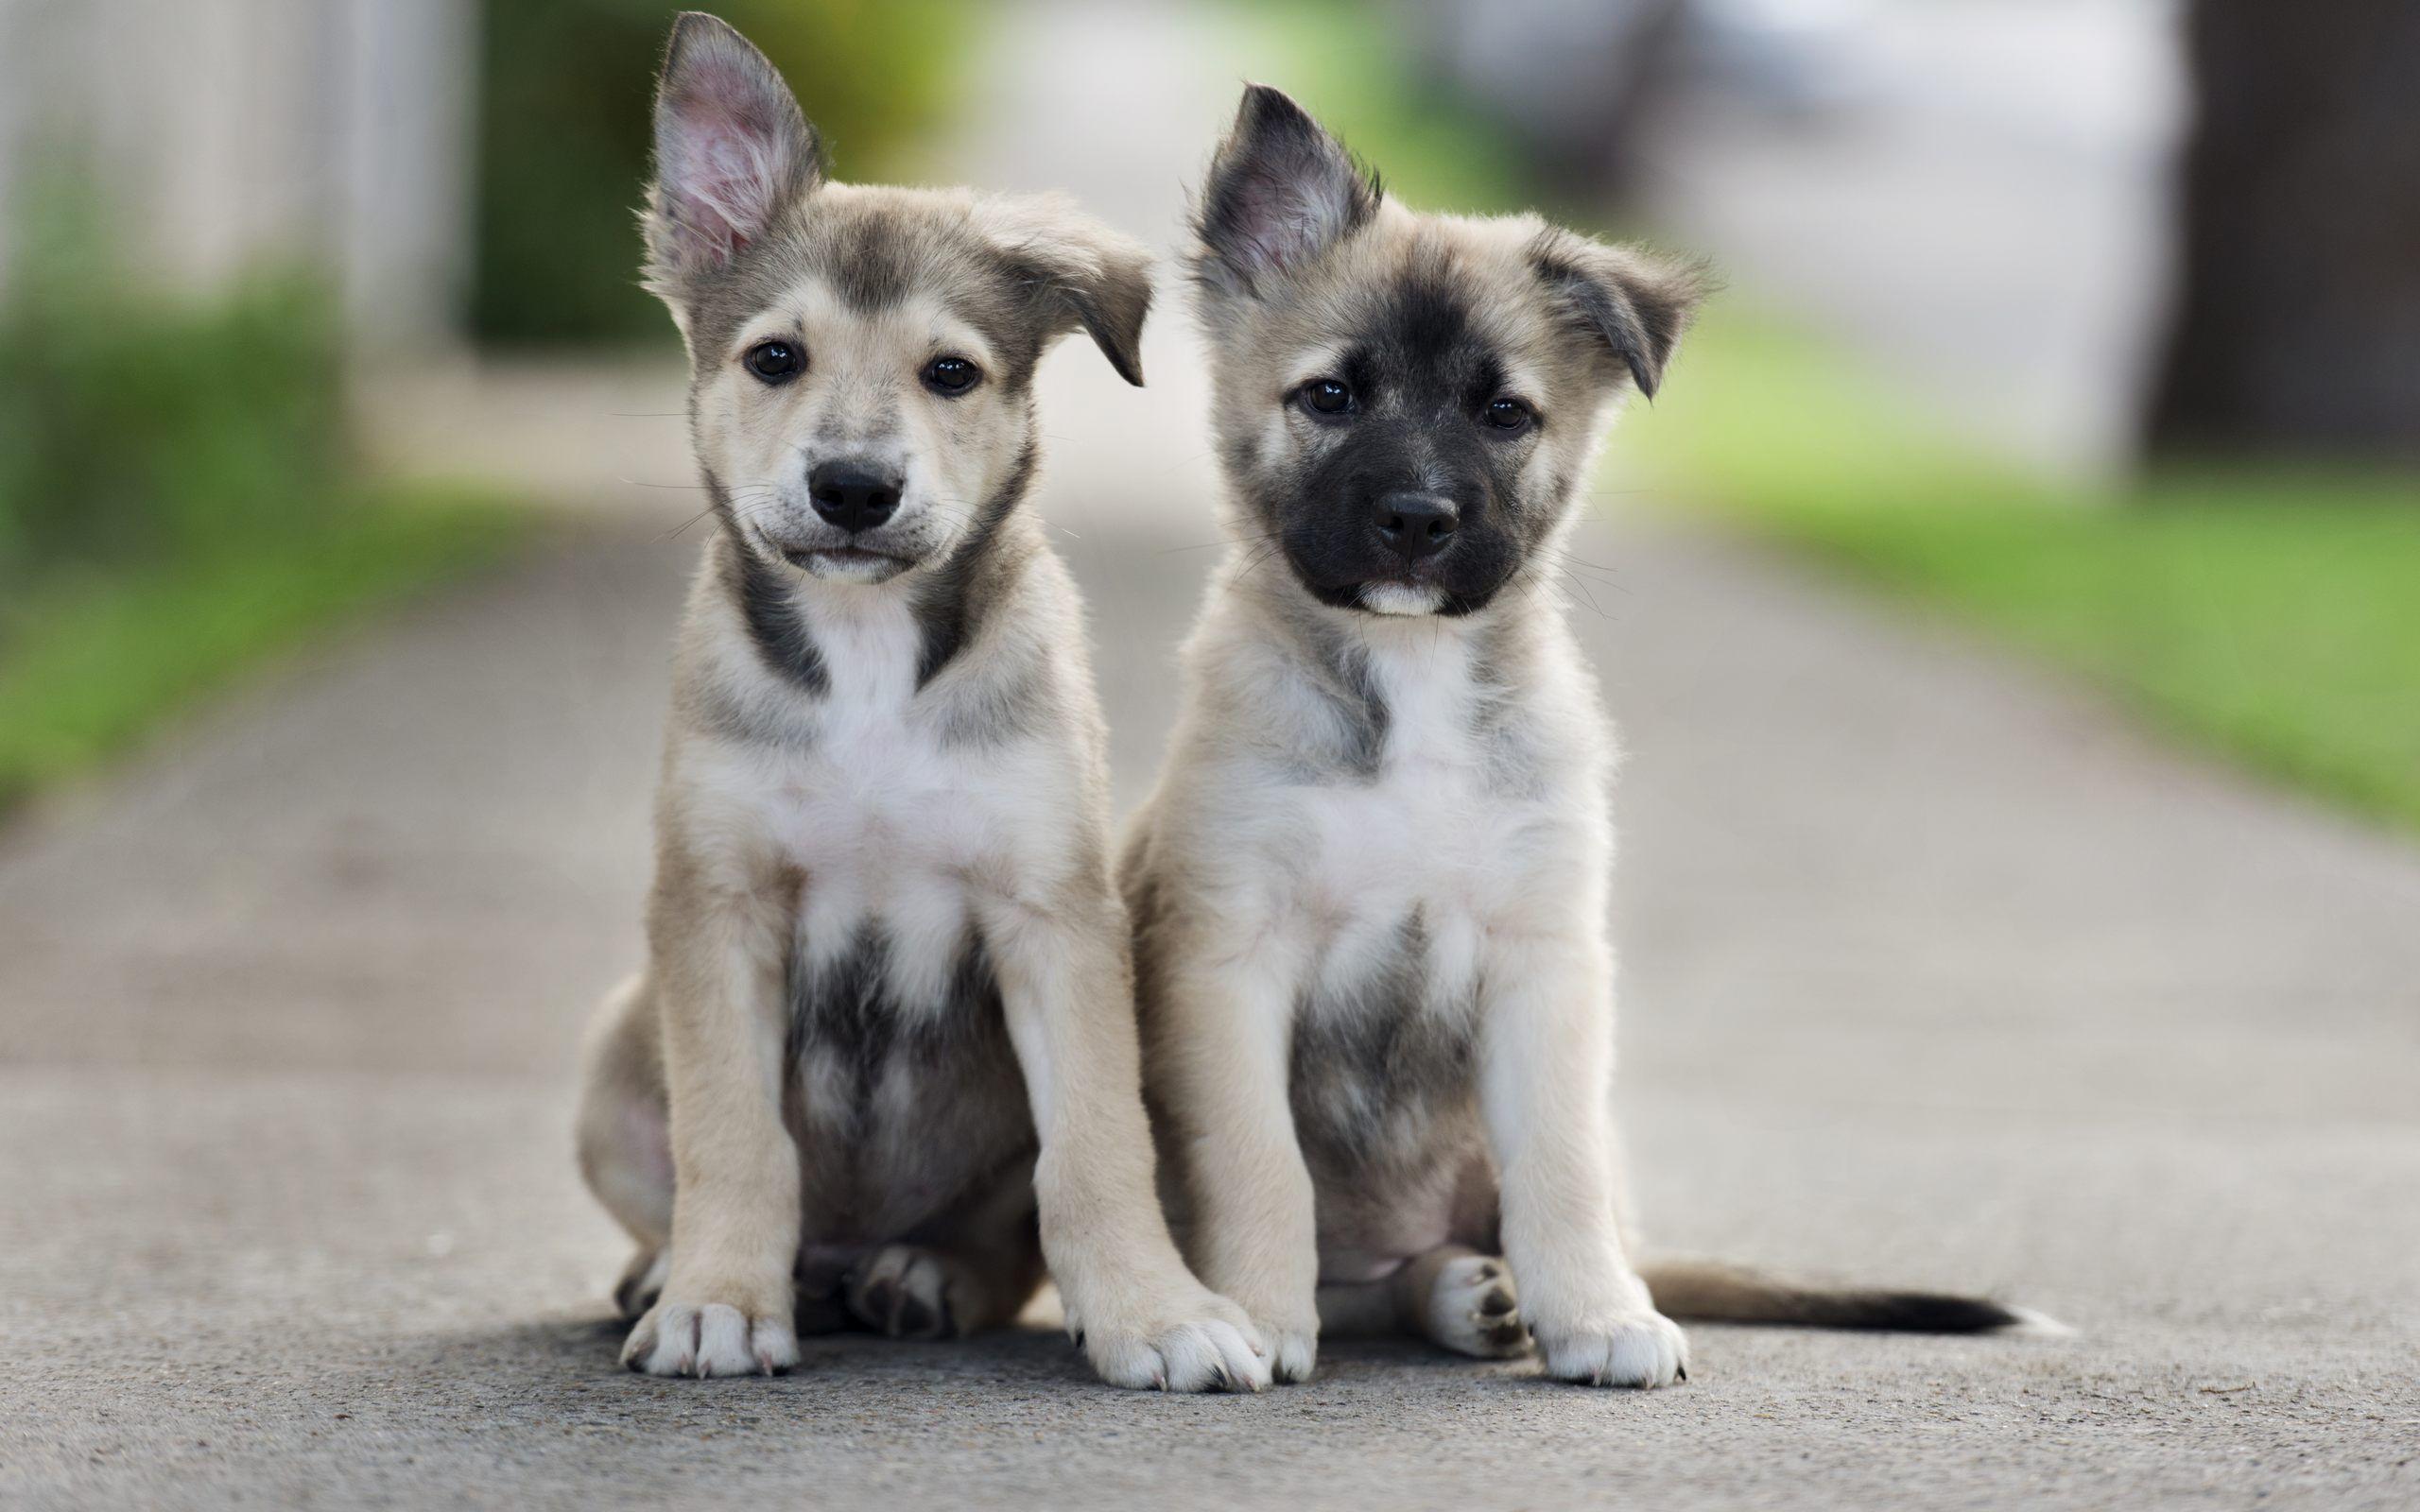 Cute Puppies Wallpaper Free for Desktop Background Animal Puppy